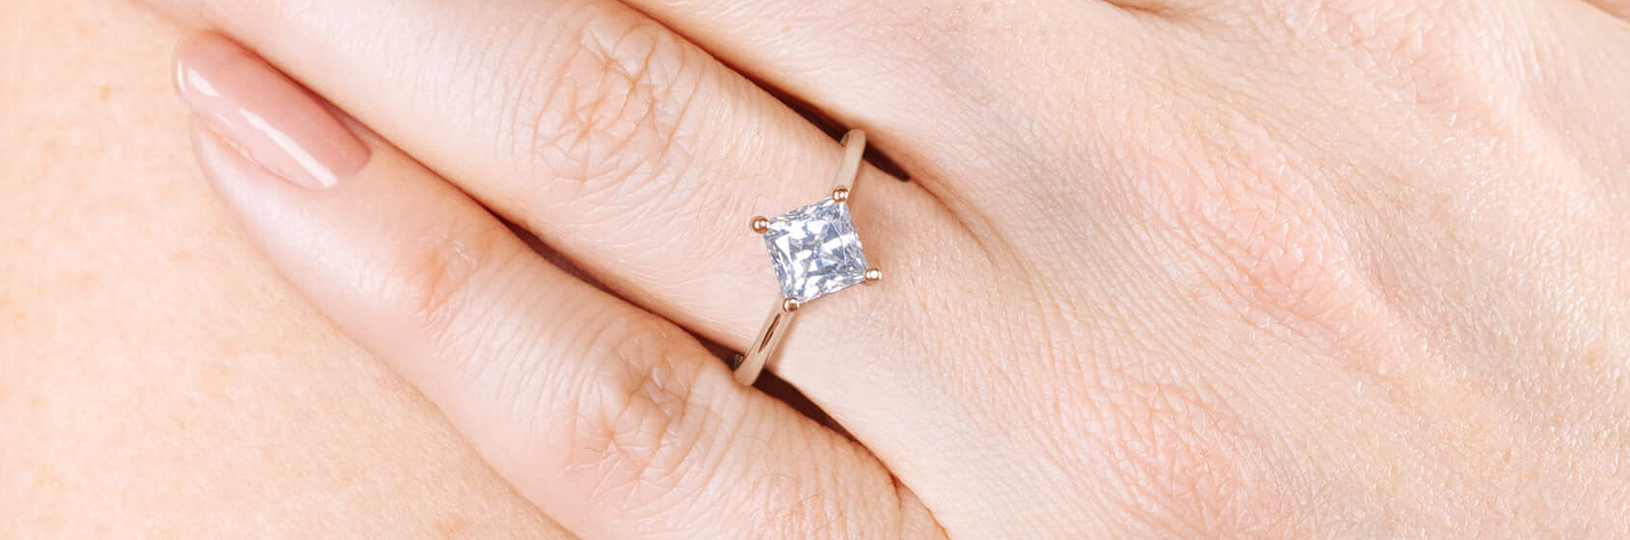 Image of a lab grown diamond engagement ring